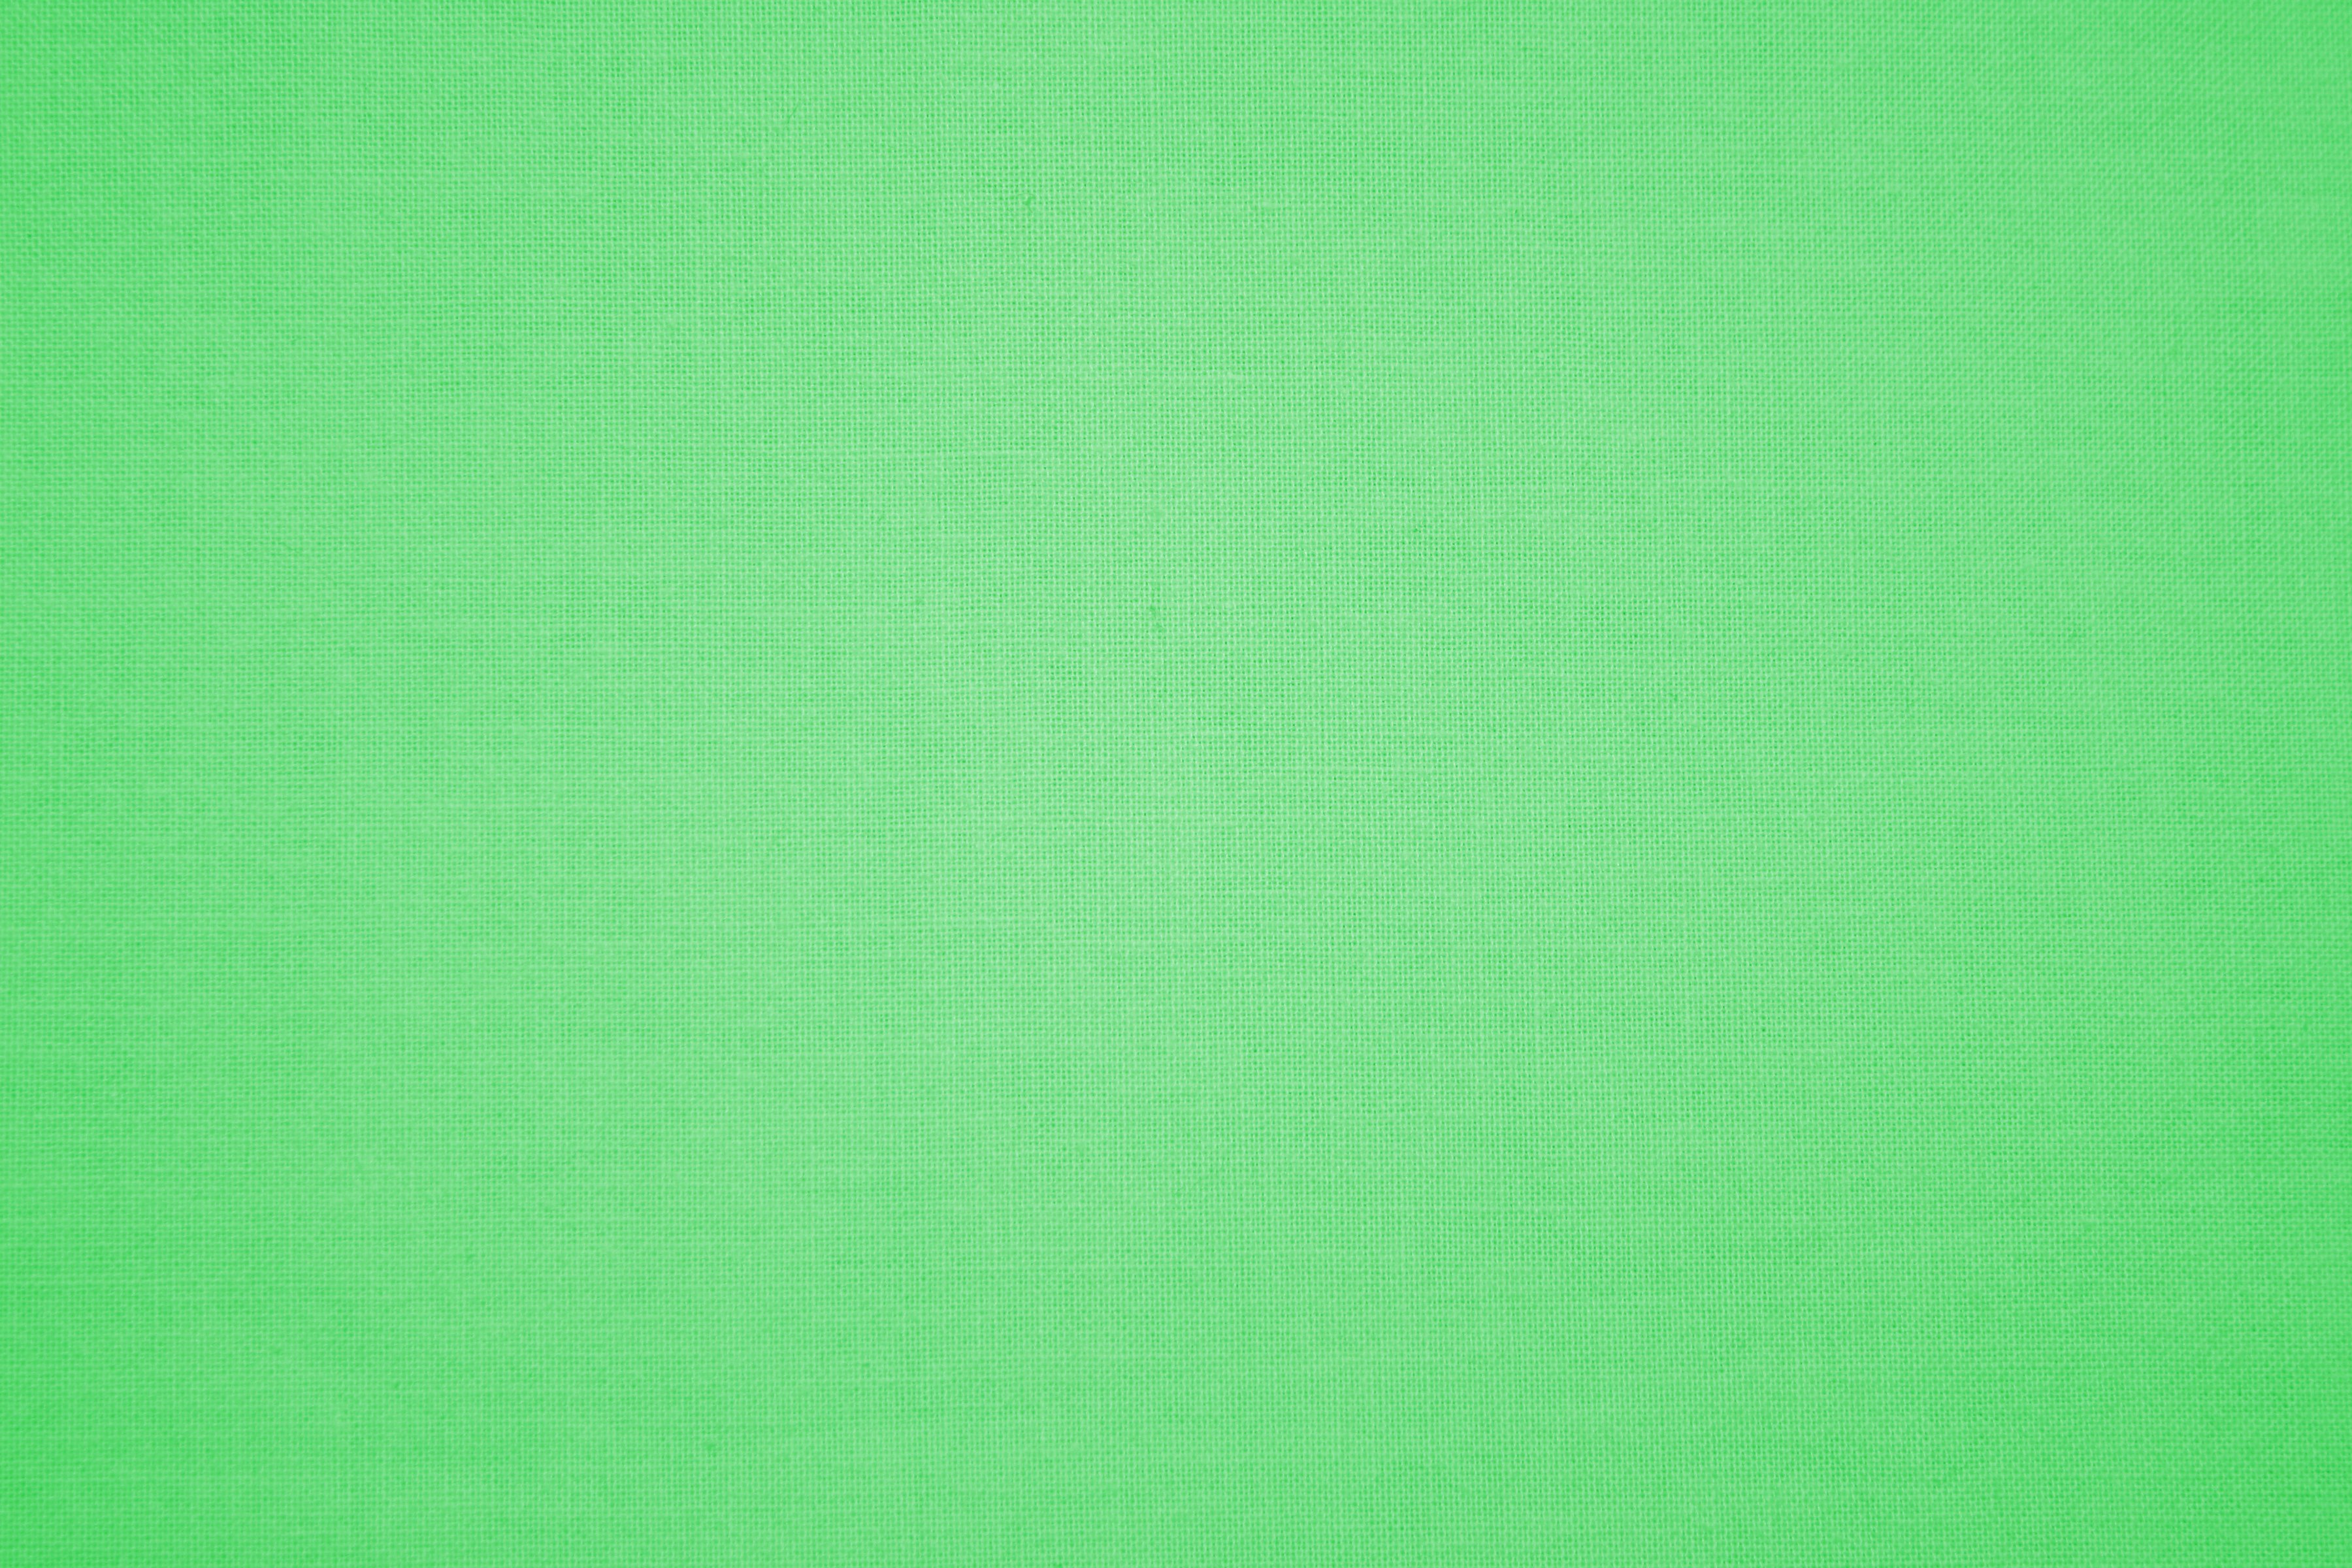 Light Green S Fabric Texture Picture Photograph Photos